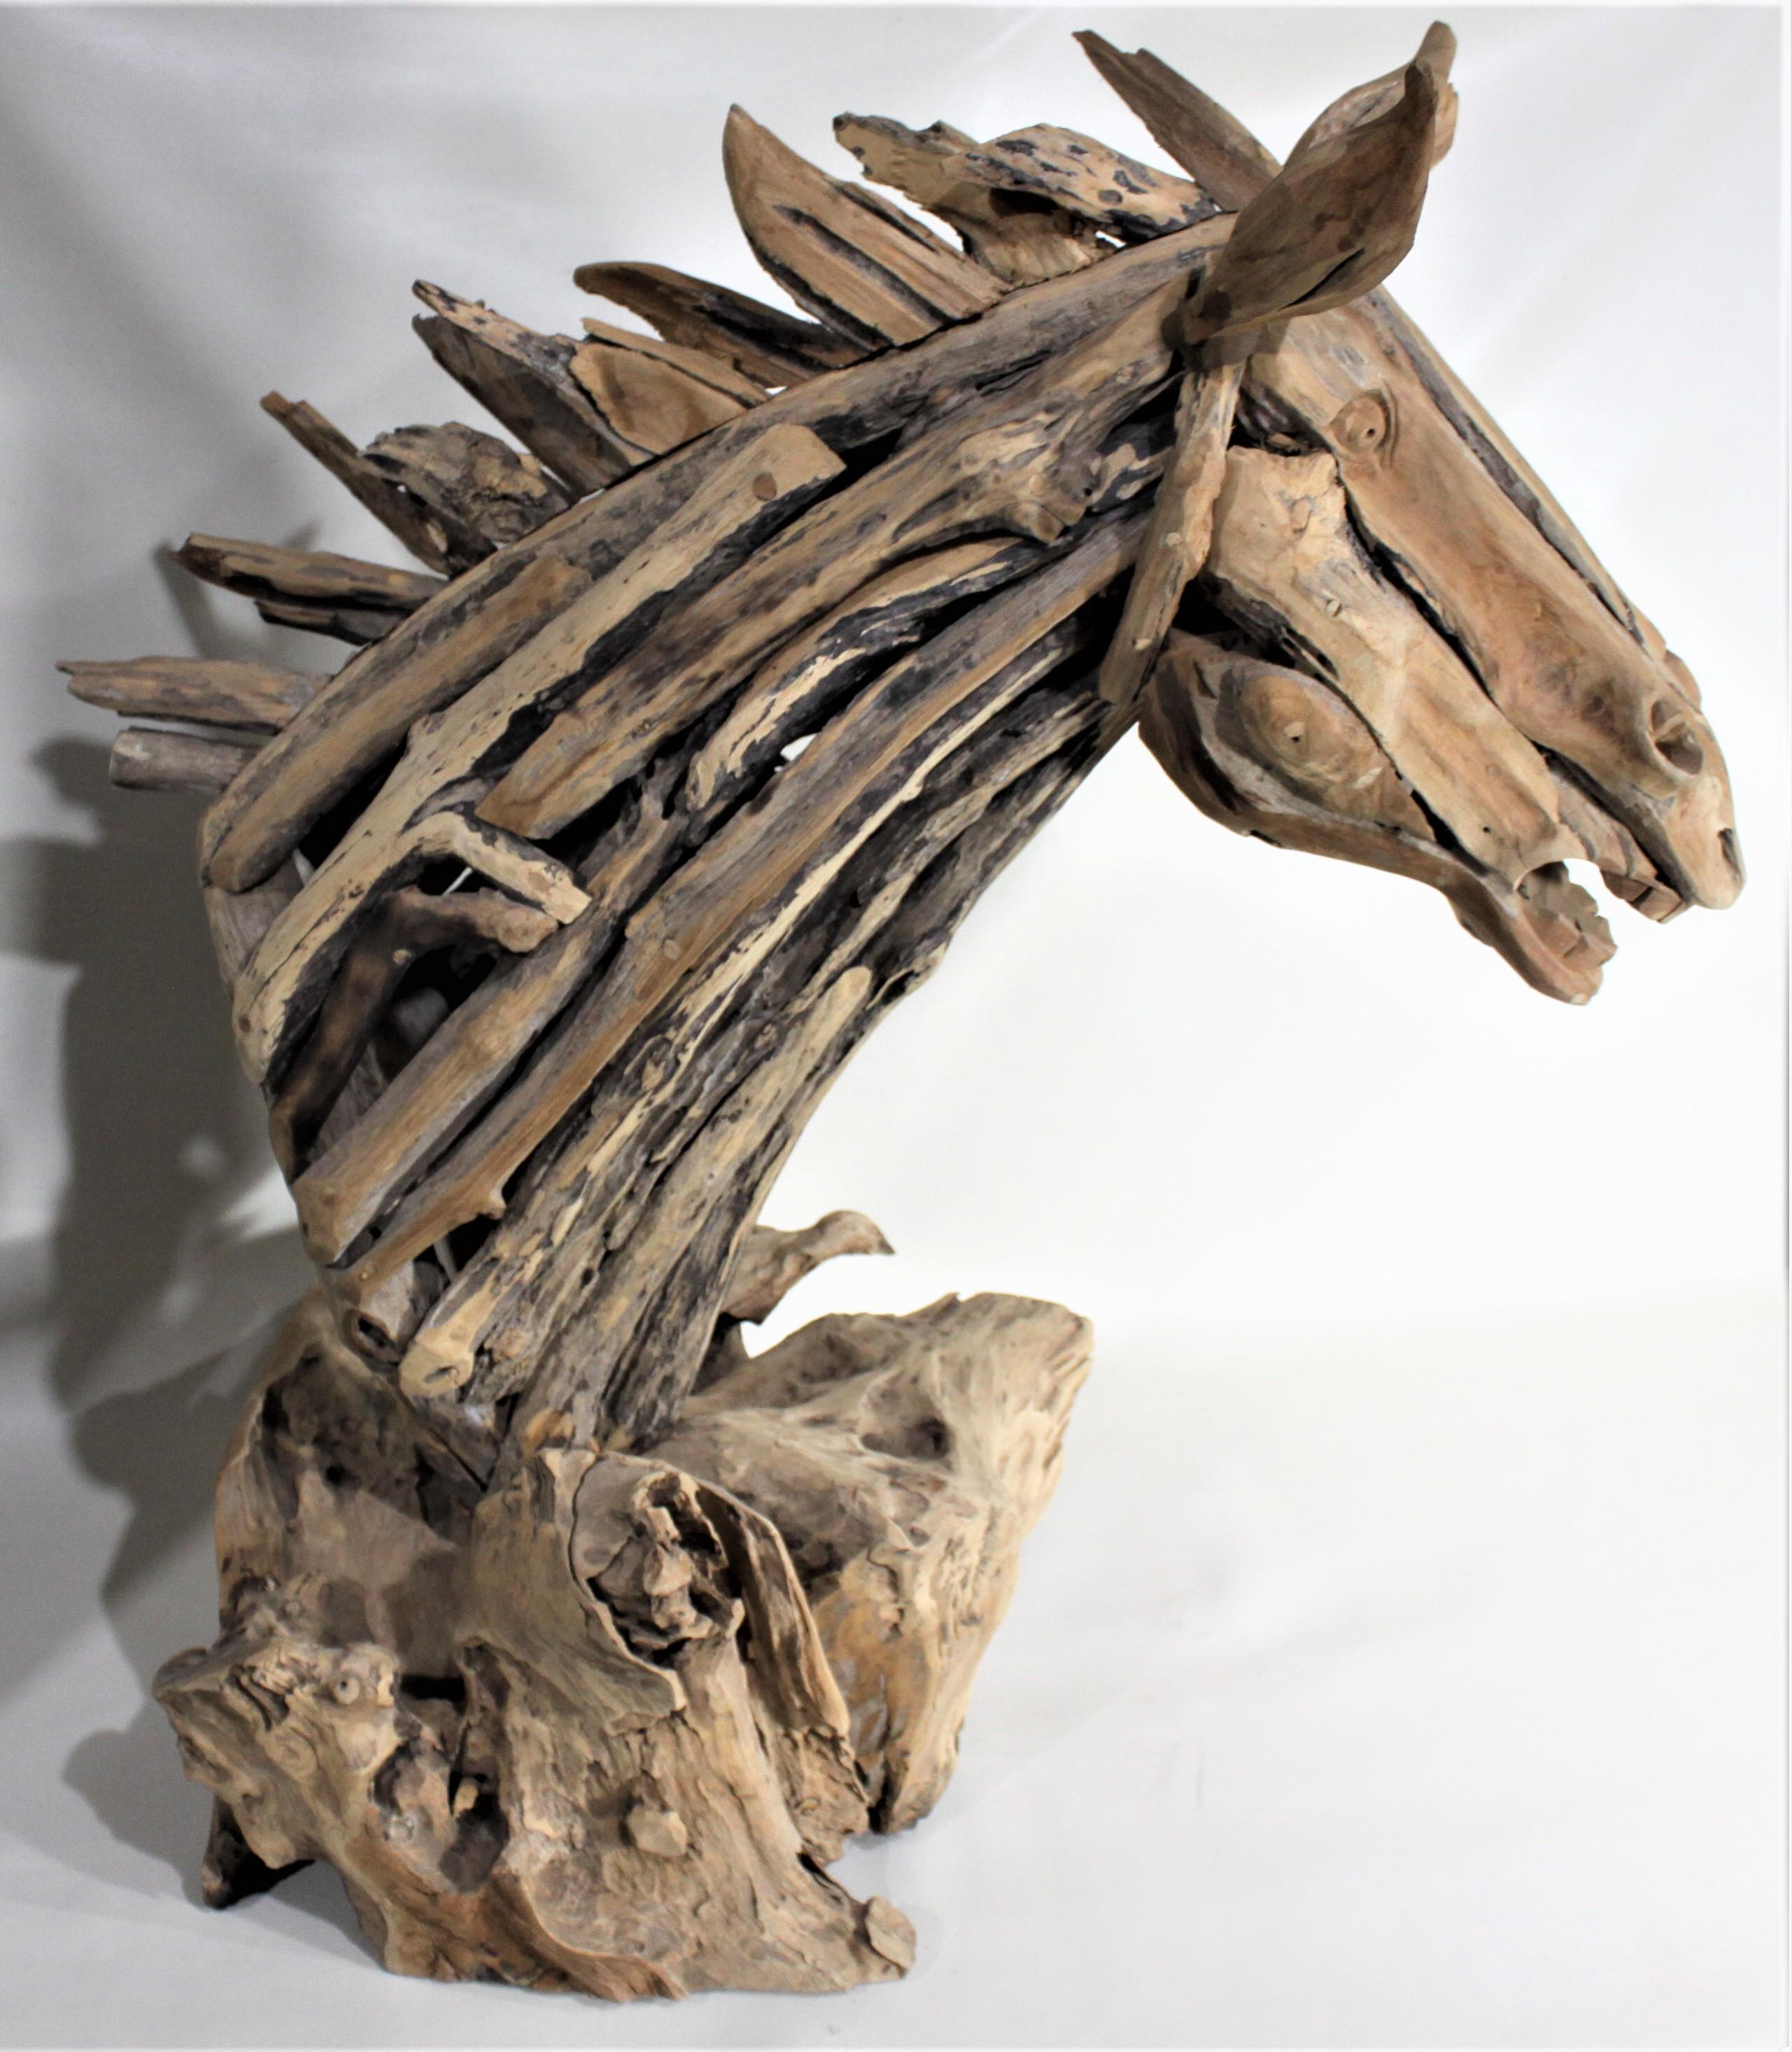 This large and substantial sculpture of a horse's head is unsigned, but believed to have been made in Canada in circa 1980. The sculpture is made completely of pieces of driftwood which have been cut, shaped and fitted to form a horse head and neck.